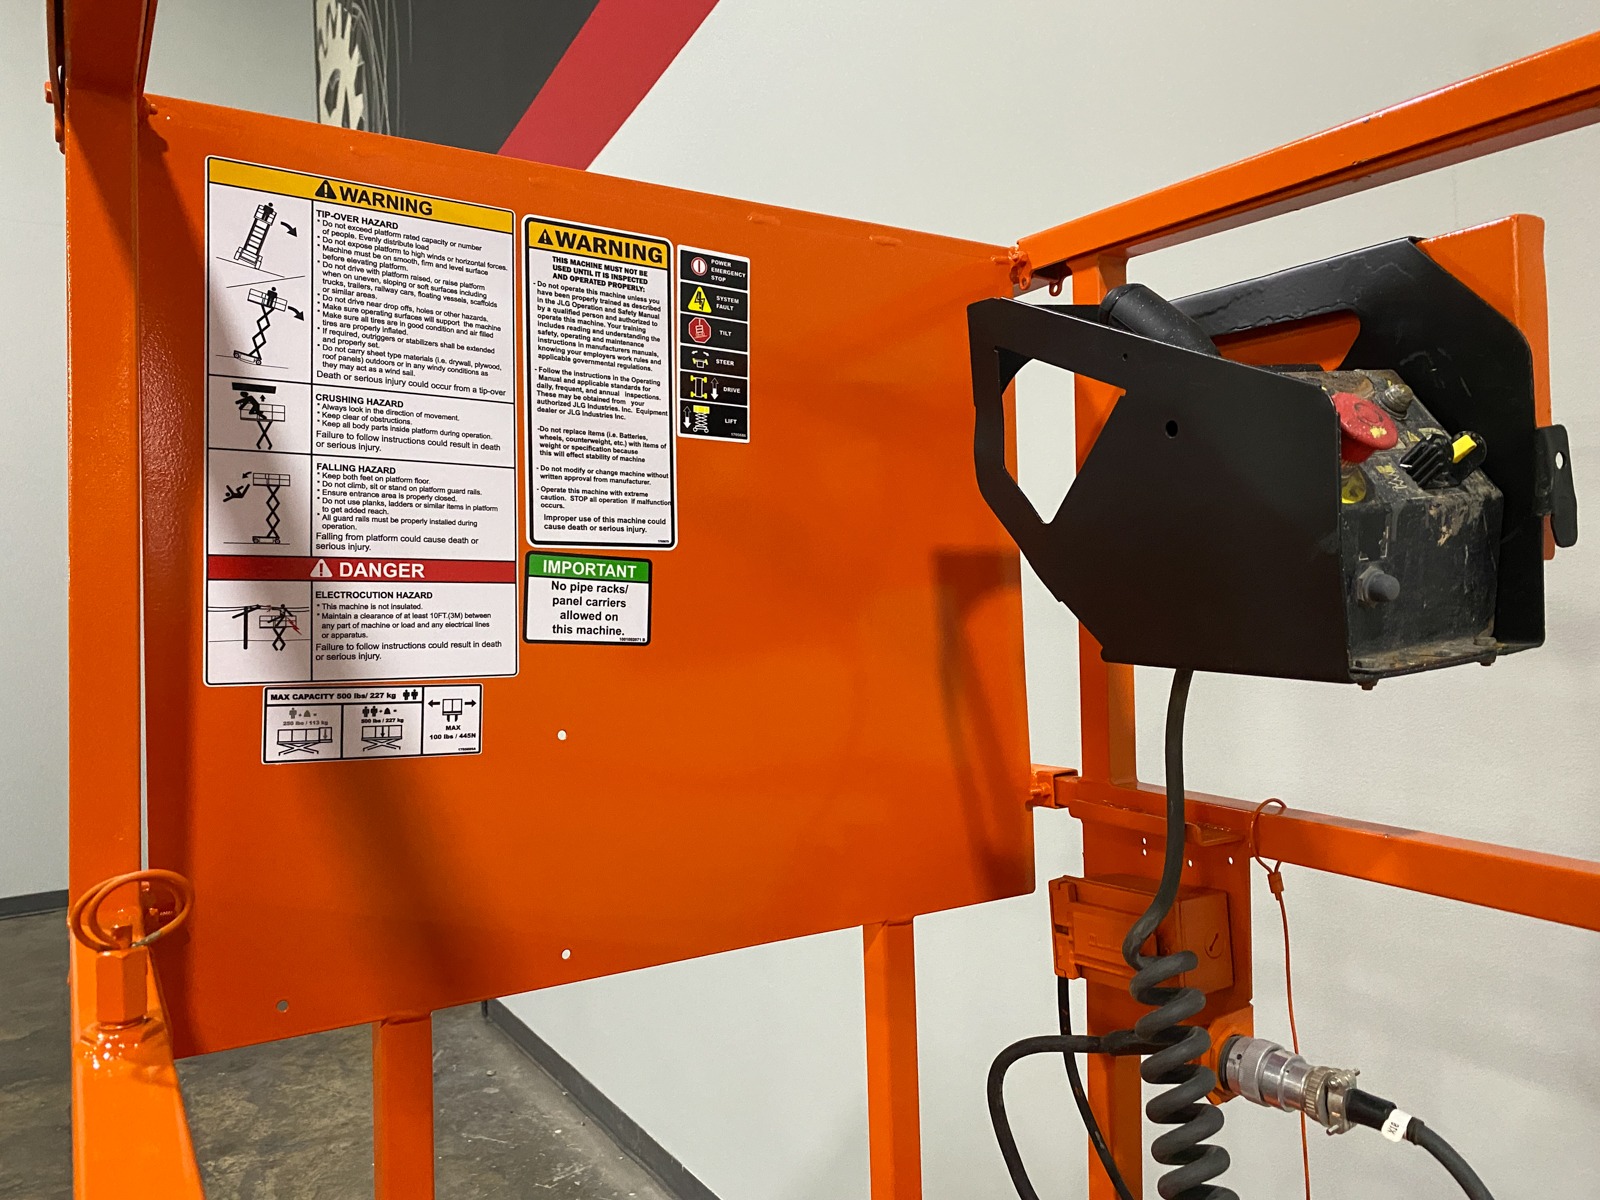 Used 2016 JLG 1932RS  | Cary, IL